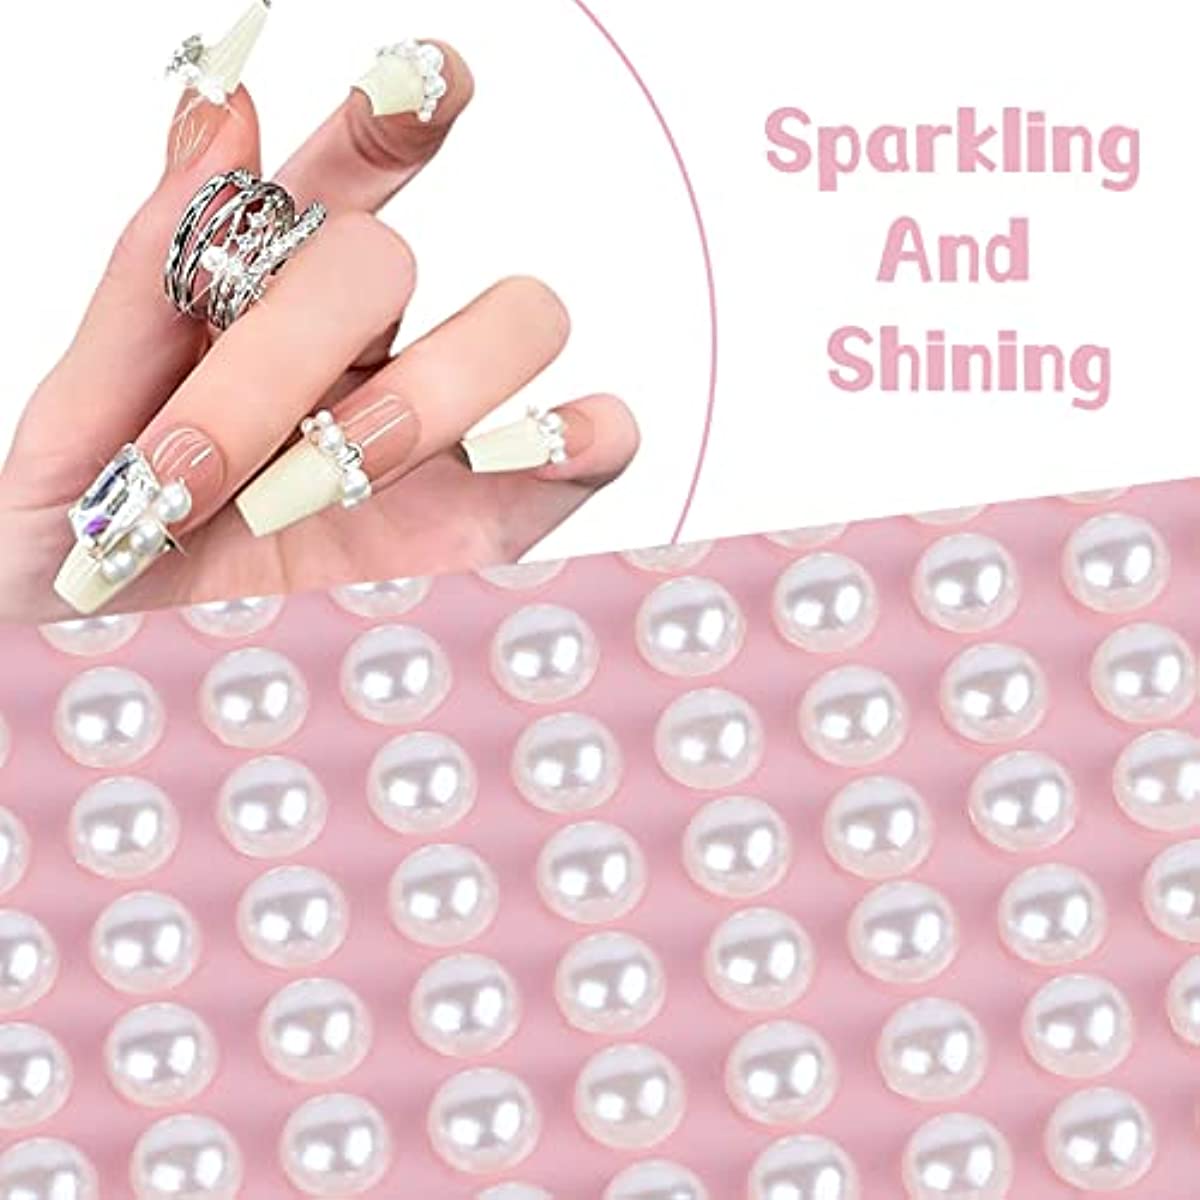 NOOEPC Self Adhesive Hair Gems and Hair Pearls, Face Pearls and Jewels  Stickers for Makeup,Hair Diamonds,Hair Pearls Stick On,Bling Stickers